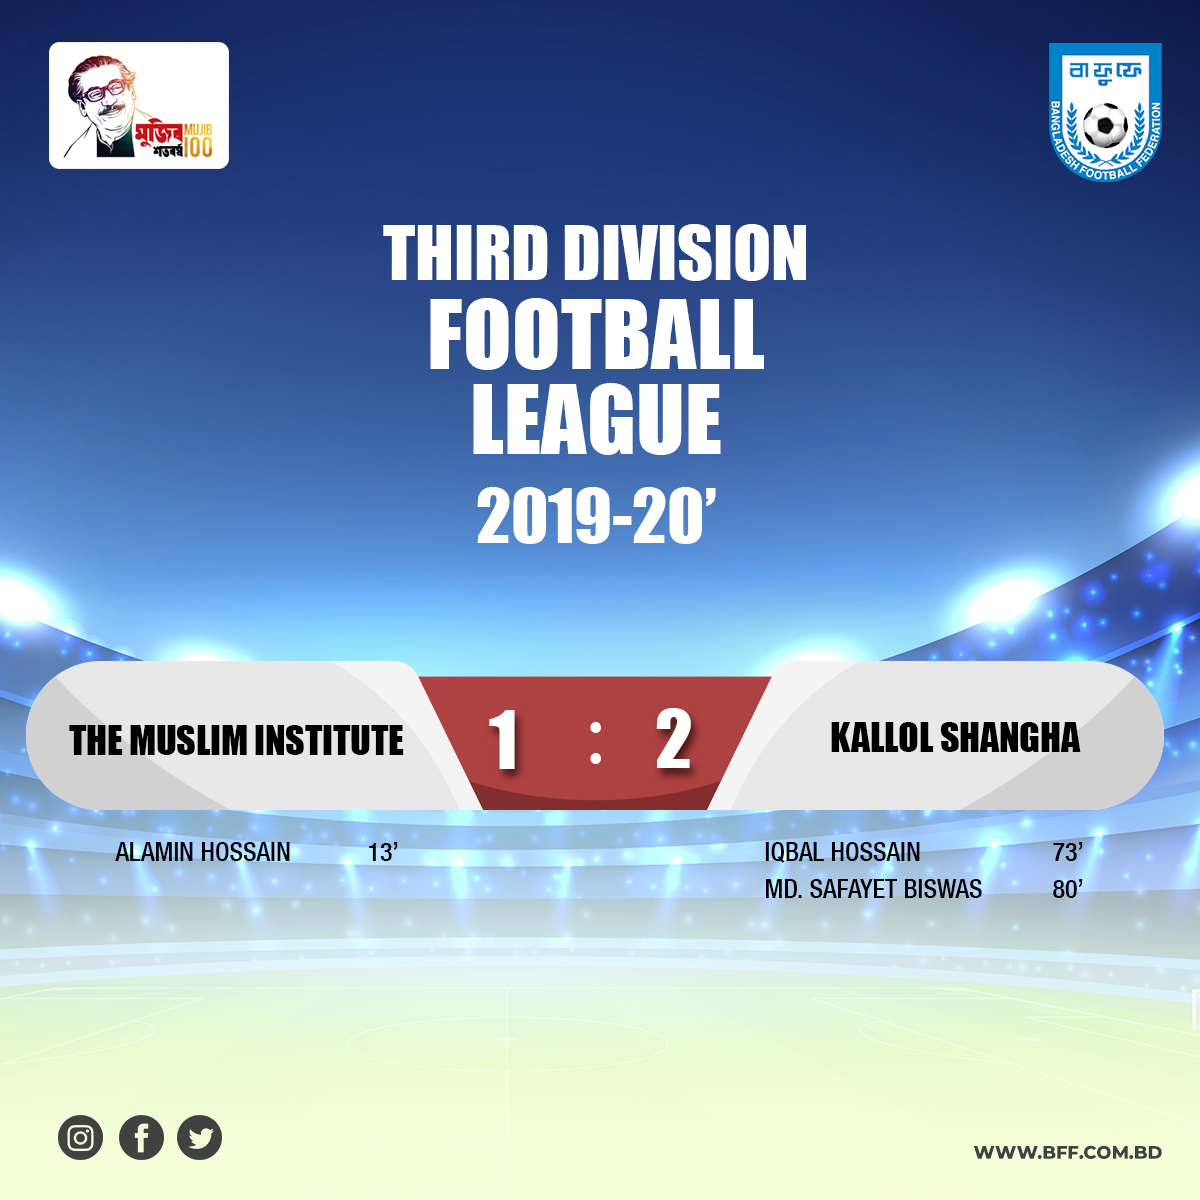 Kallol Shangha defeated The Muslim Institute by 2-1 goals.